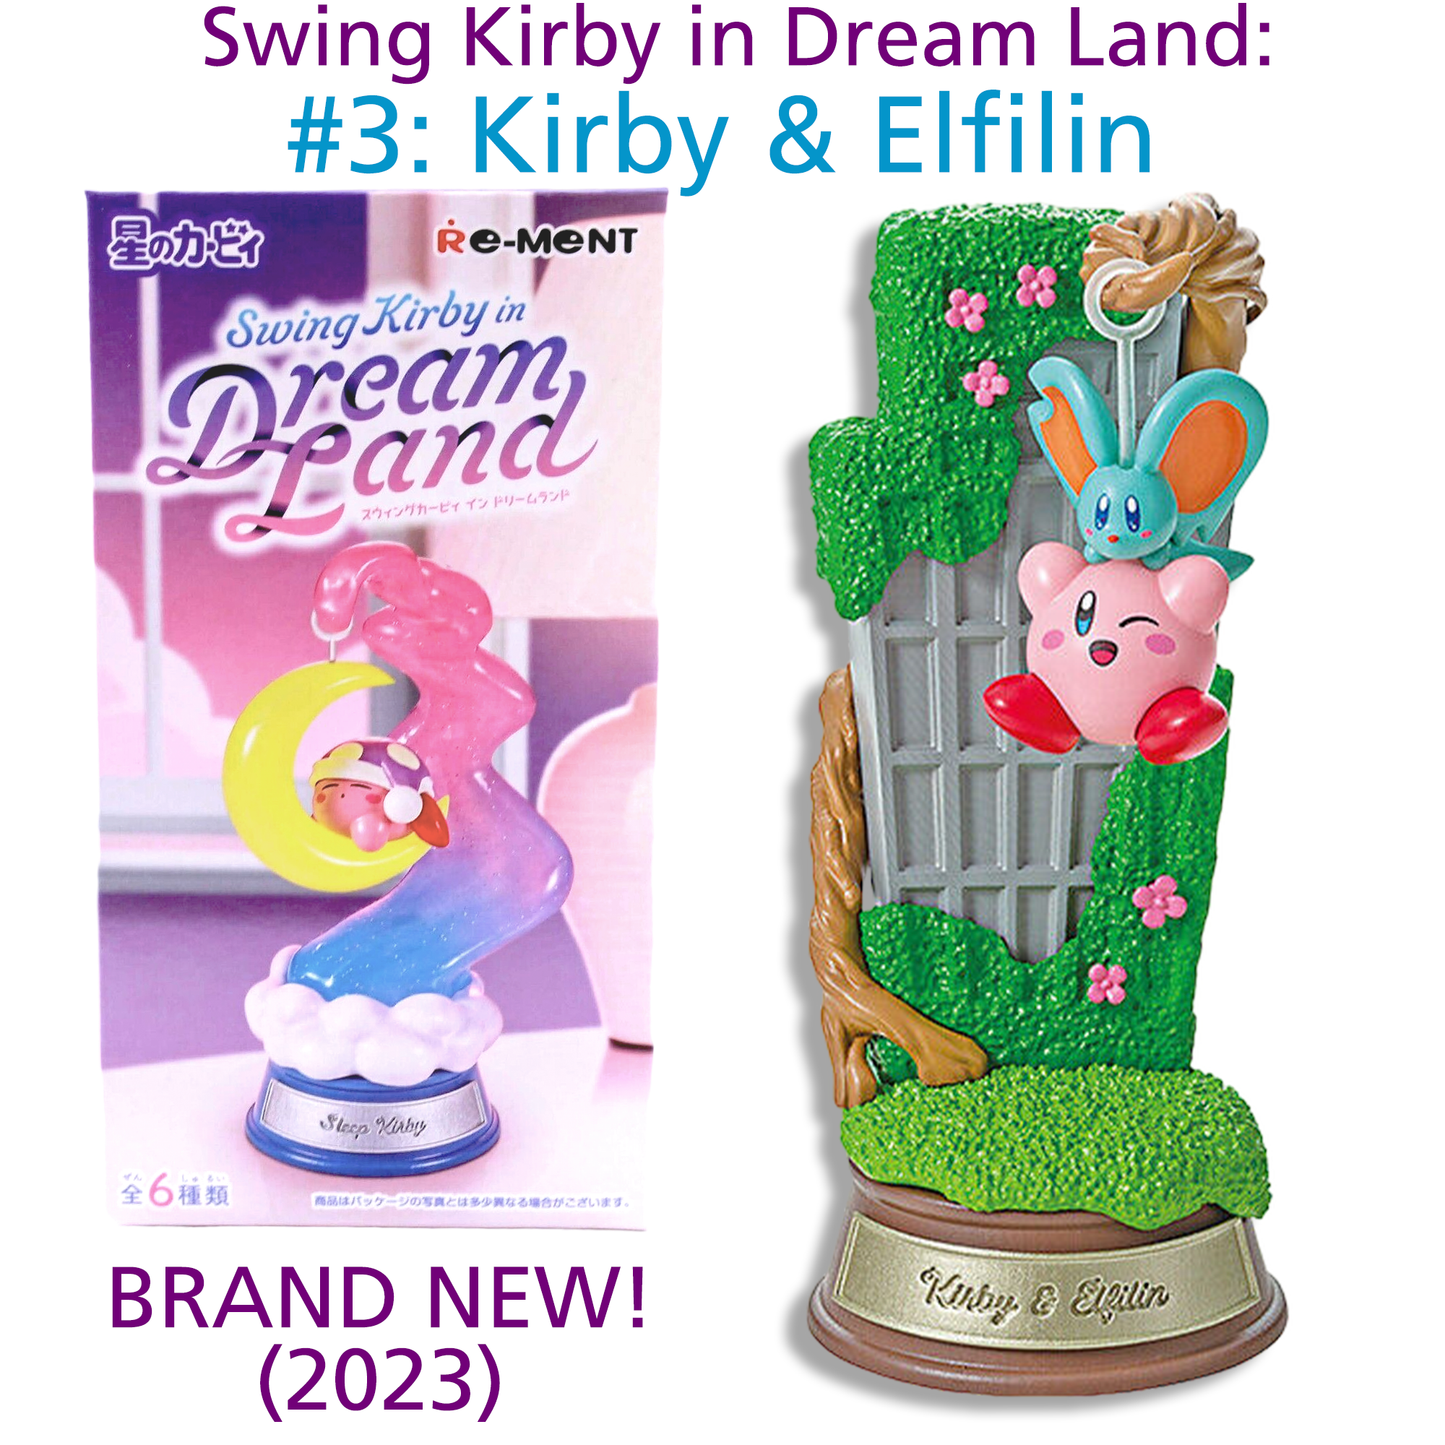 KIRBY & ELFILIN - Kirby Swing Collection Dream Land RE-MENT #3 (NEW) 2023 - USA